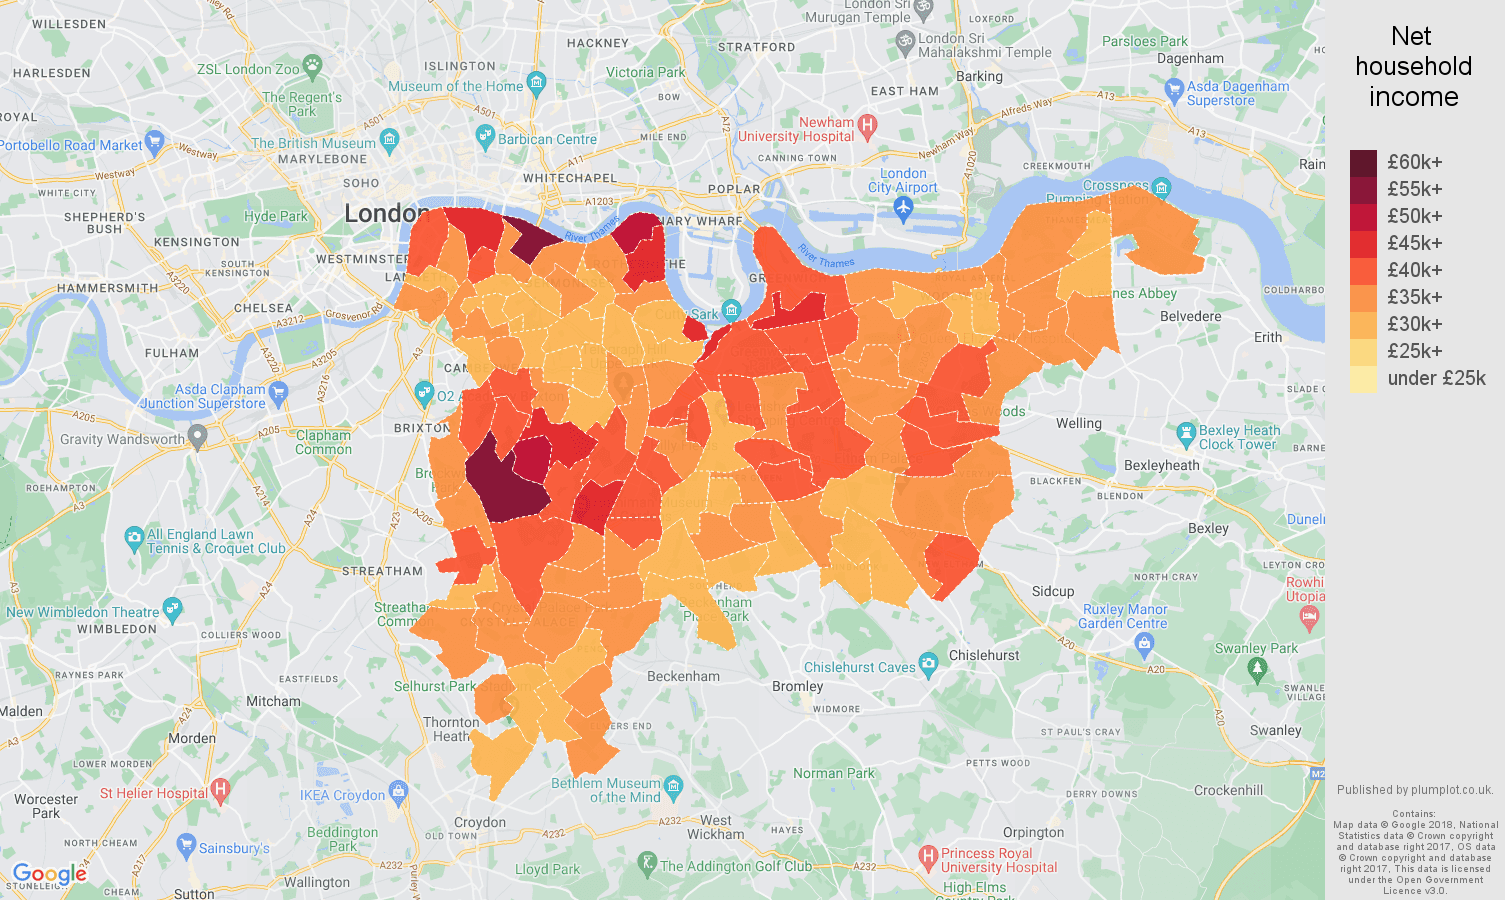 South East London net household income map